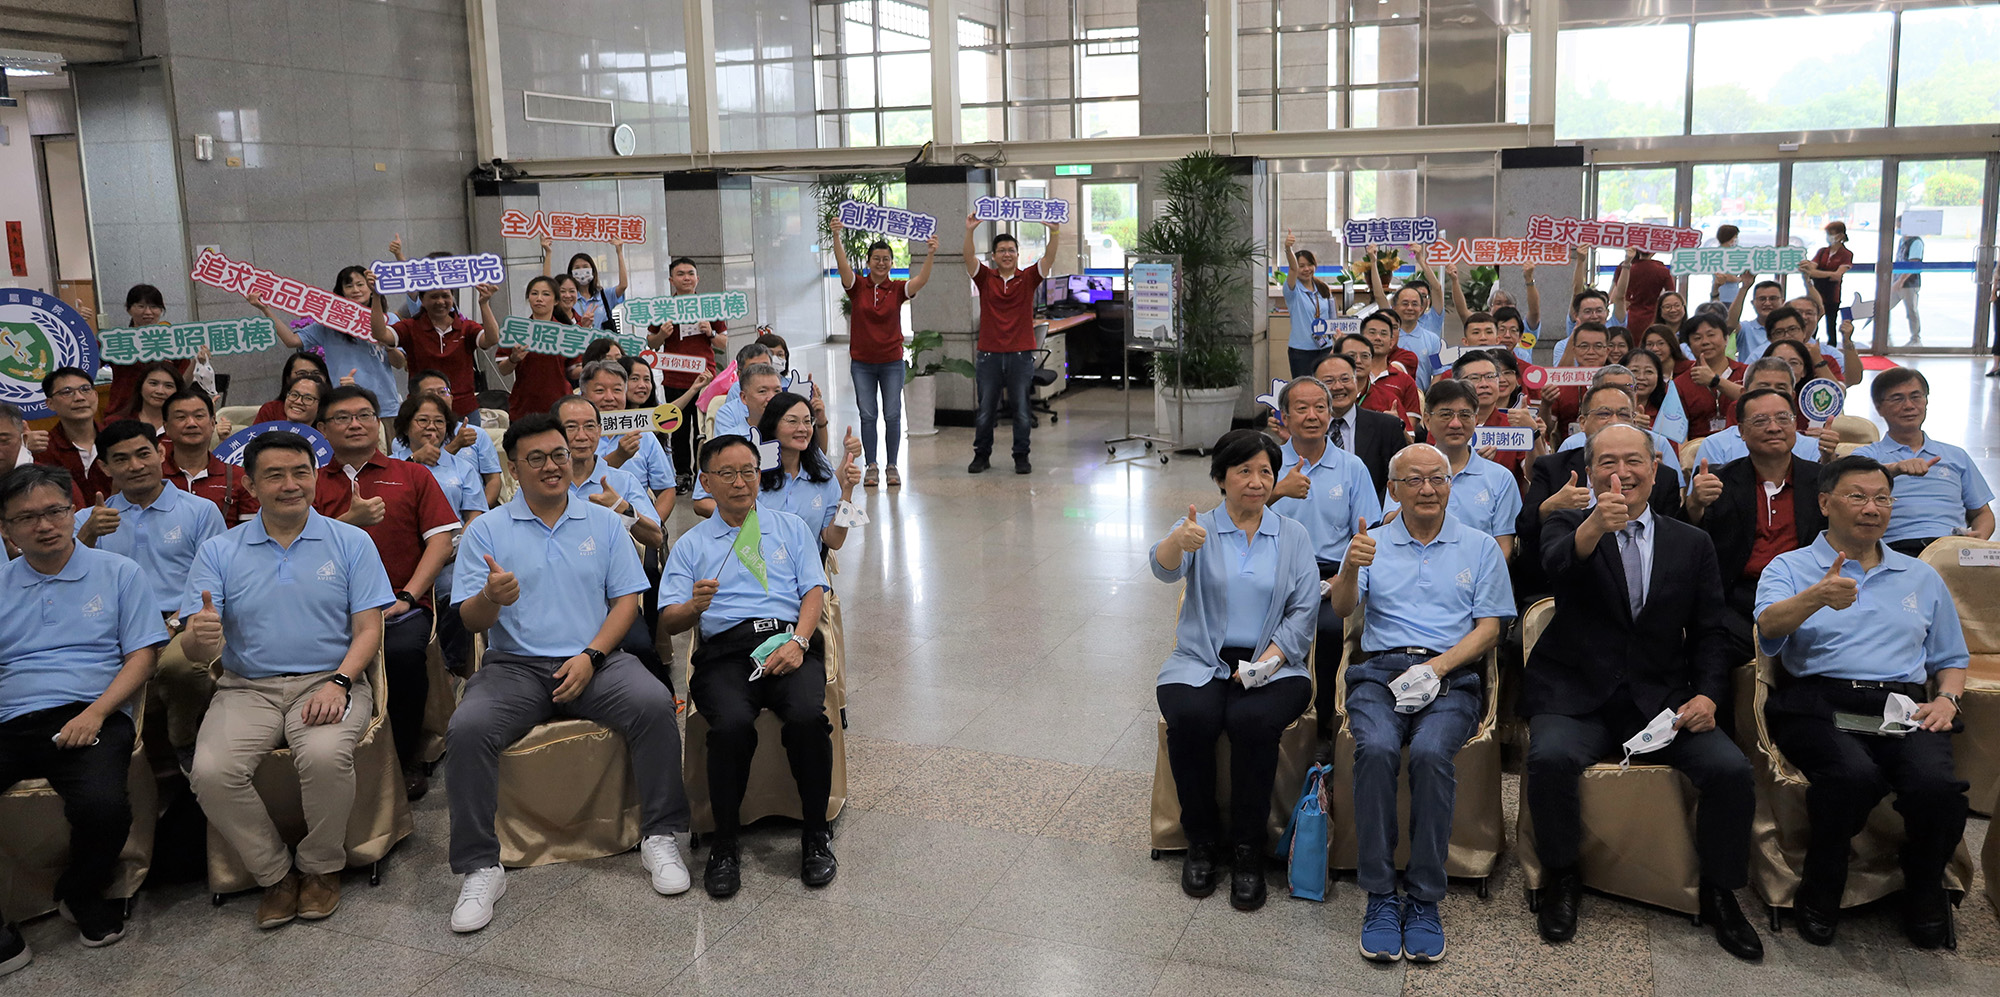 Asia University President Jeffrey J.P. Tsai (front row, right 1) stated that after the operation of the "Fengfu Park," it will serve as a place for internships and employment for all six colleges of Asia University, where students can transition directly from graduation to employment.